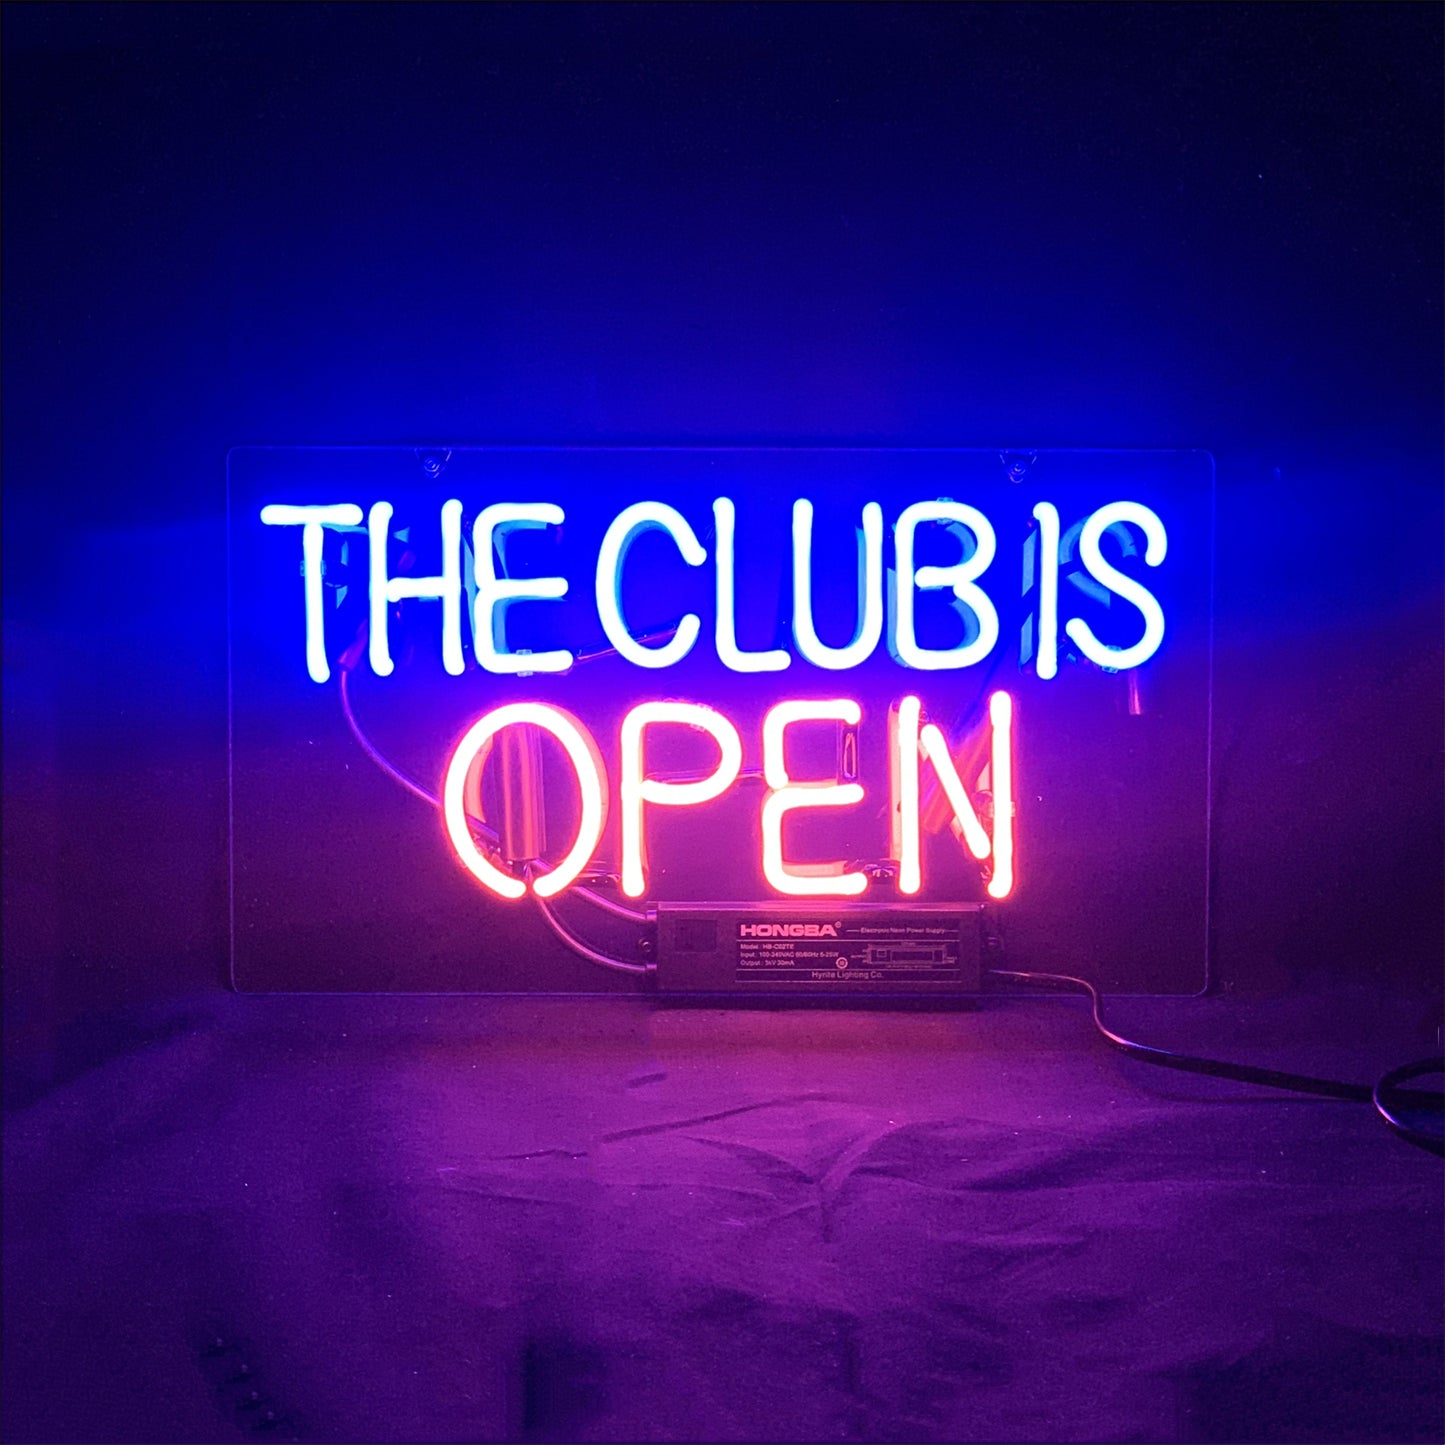 THE CLUB IS OPEN